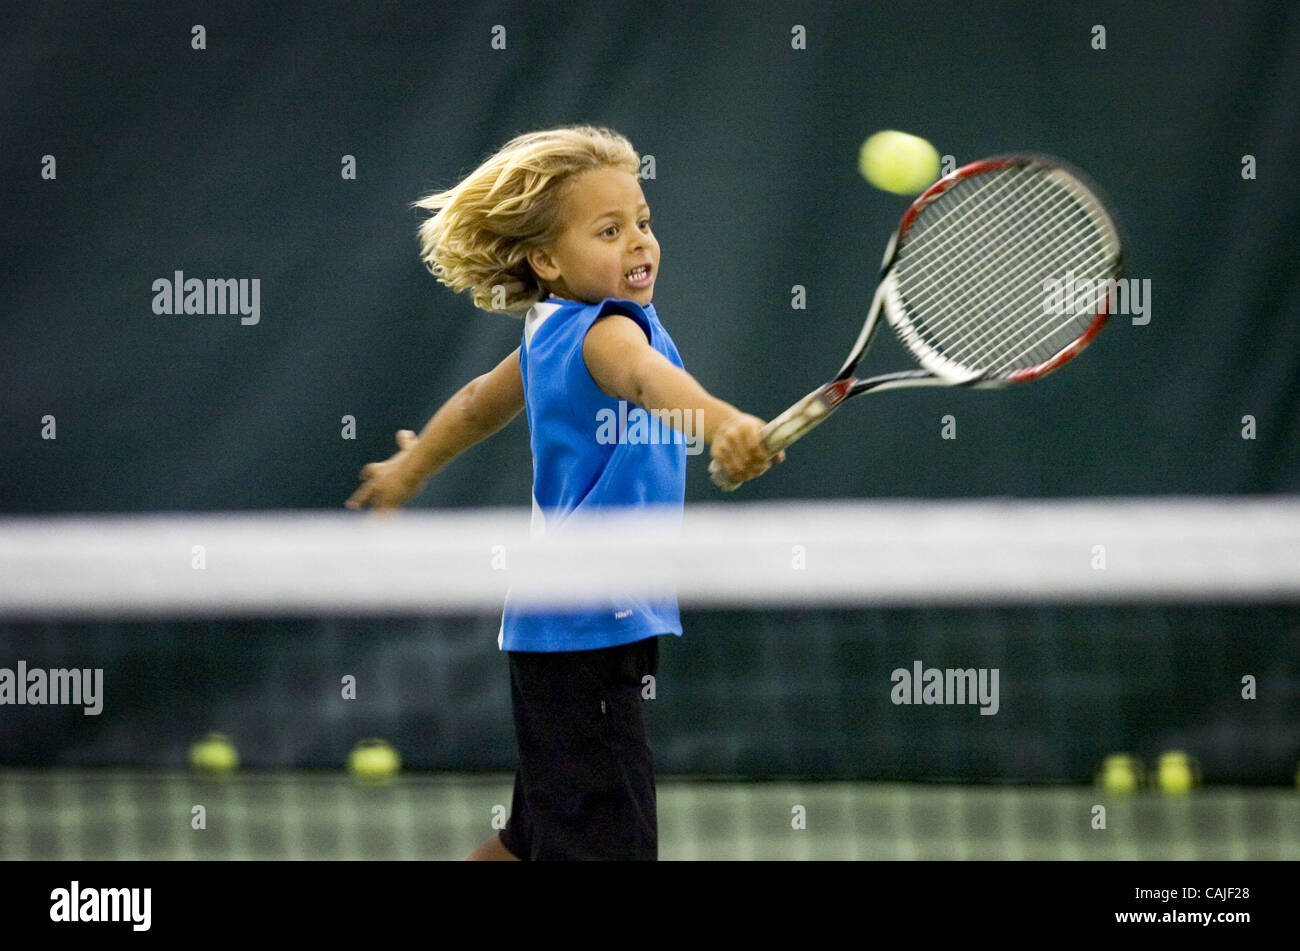 LEDE Six-year-old Jan Silva practices tennis with his family at Spare Time  Indoor Tennis Center in Gold River December 20, 2007. The youngster has  amazing tennis skills for his age, which has